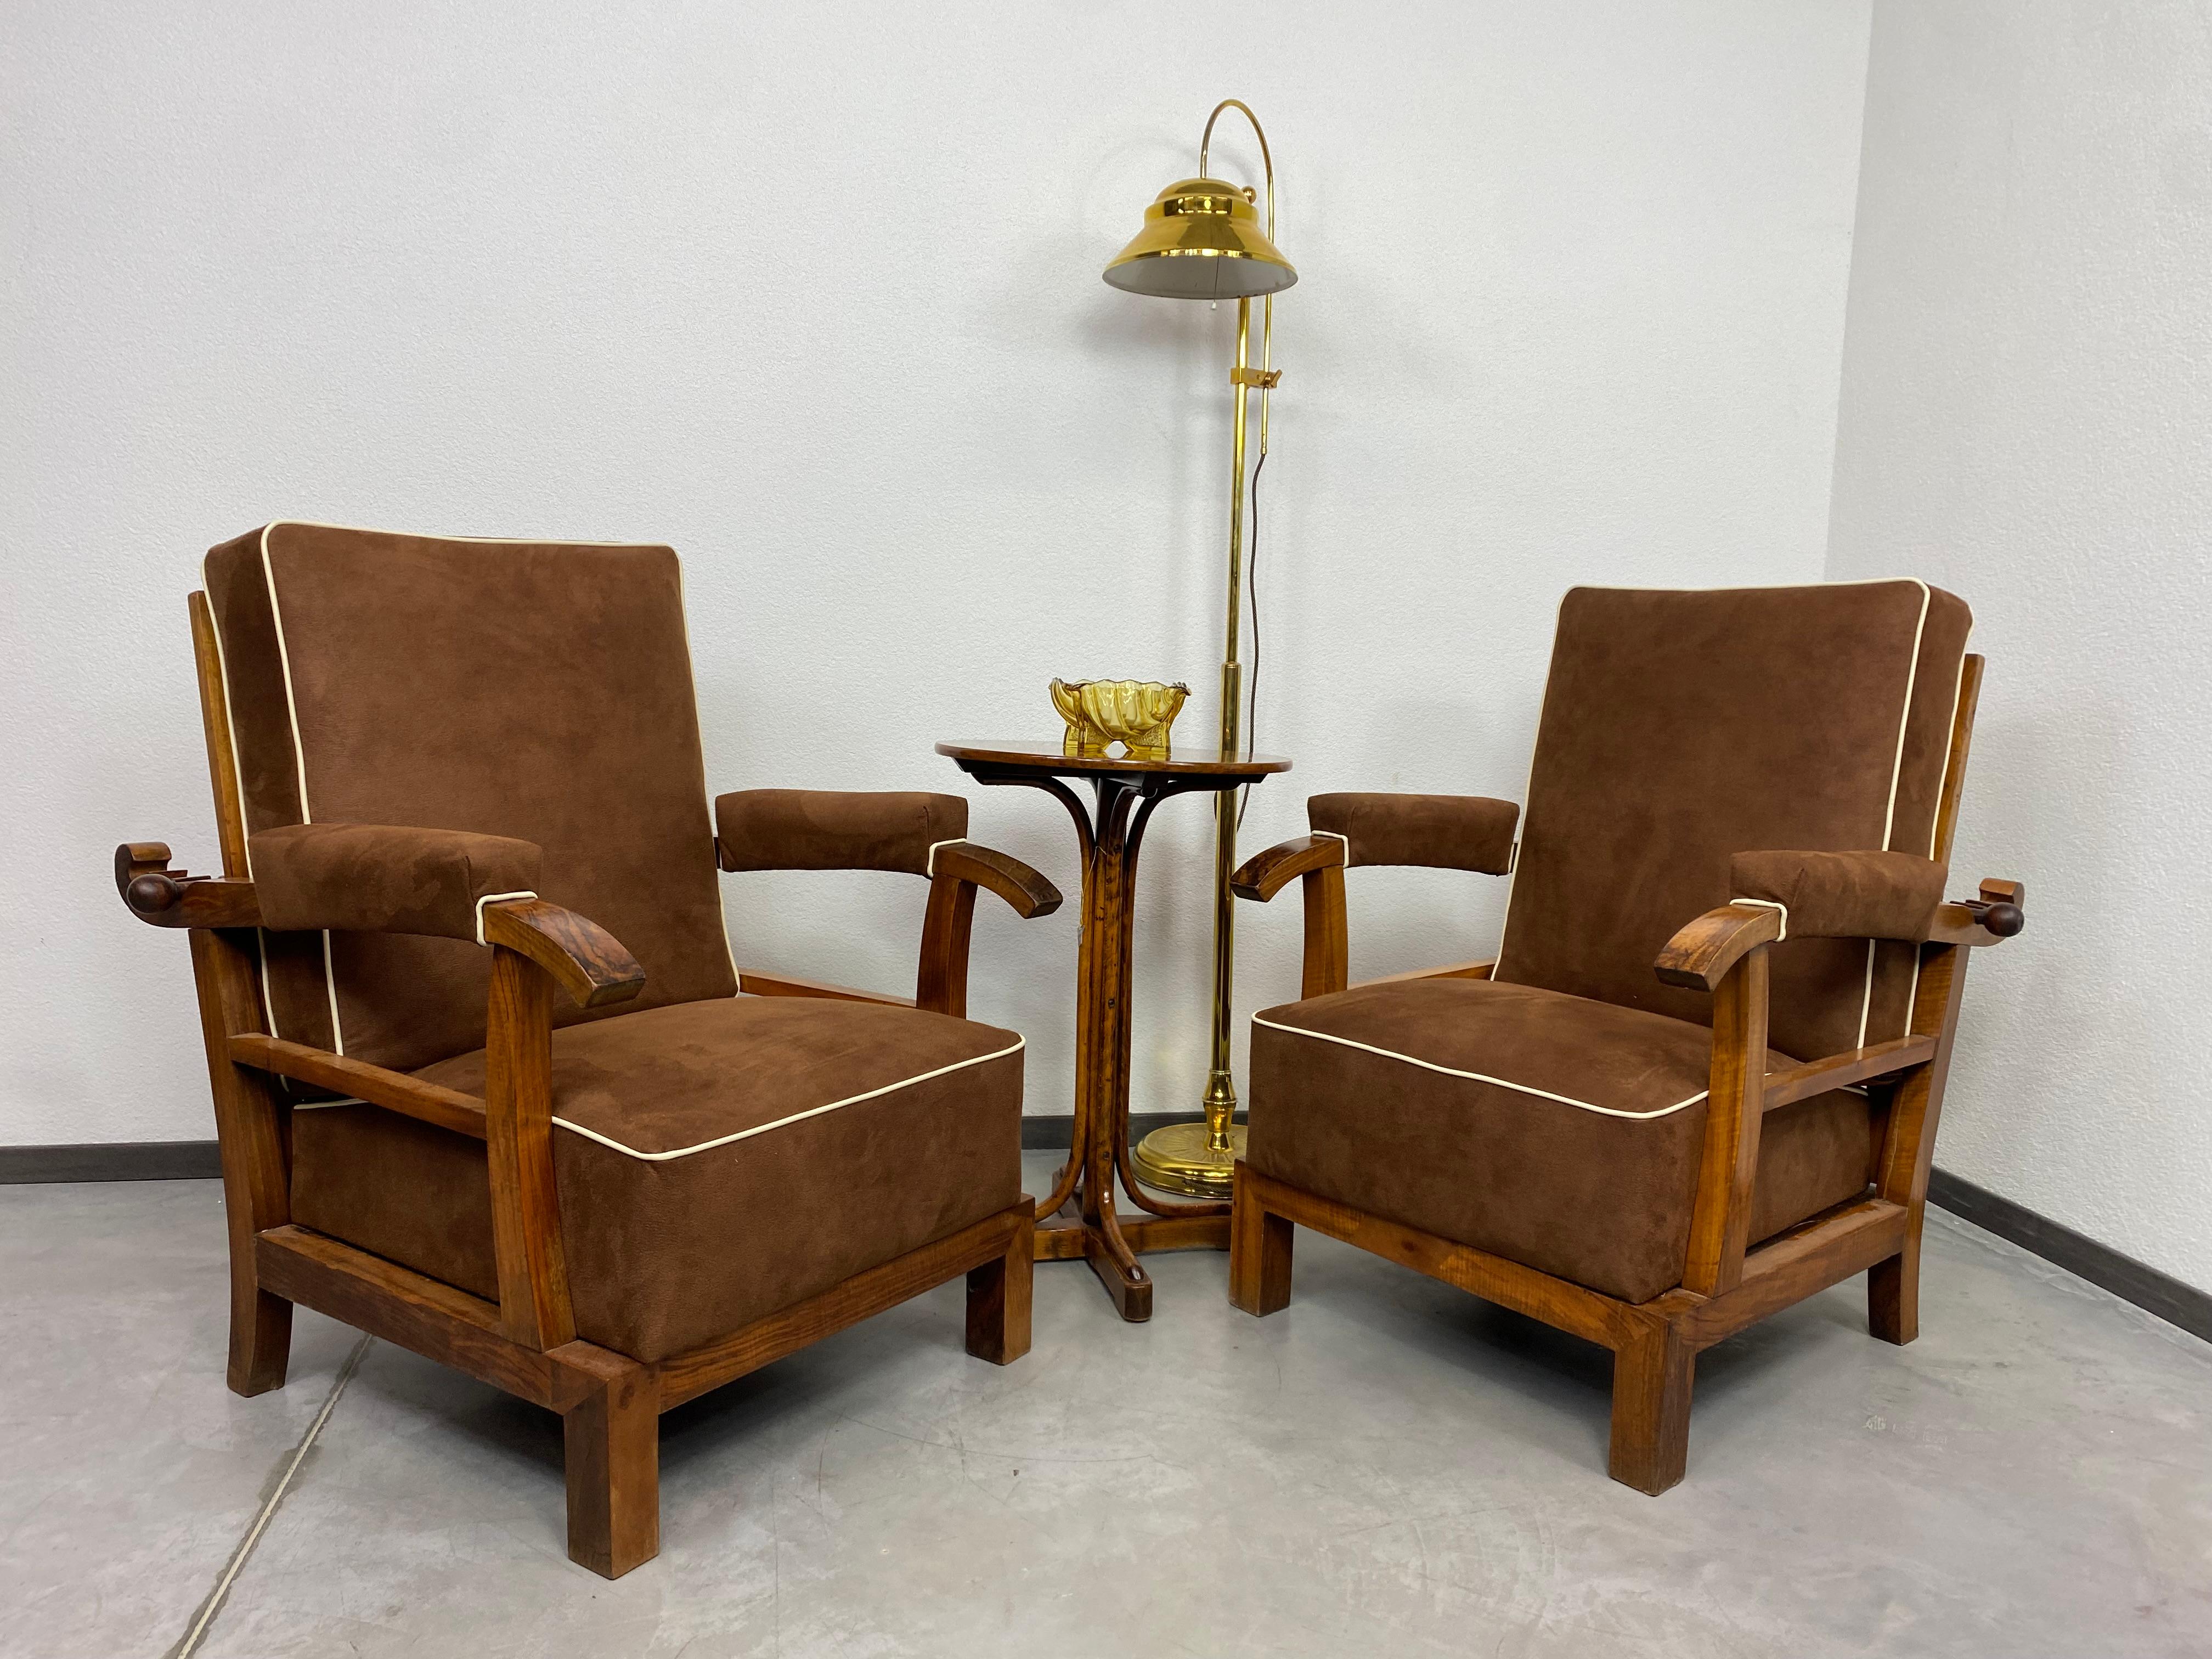 Adjustable art deco armchairs, completely restored with new fabric.